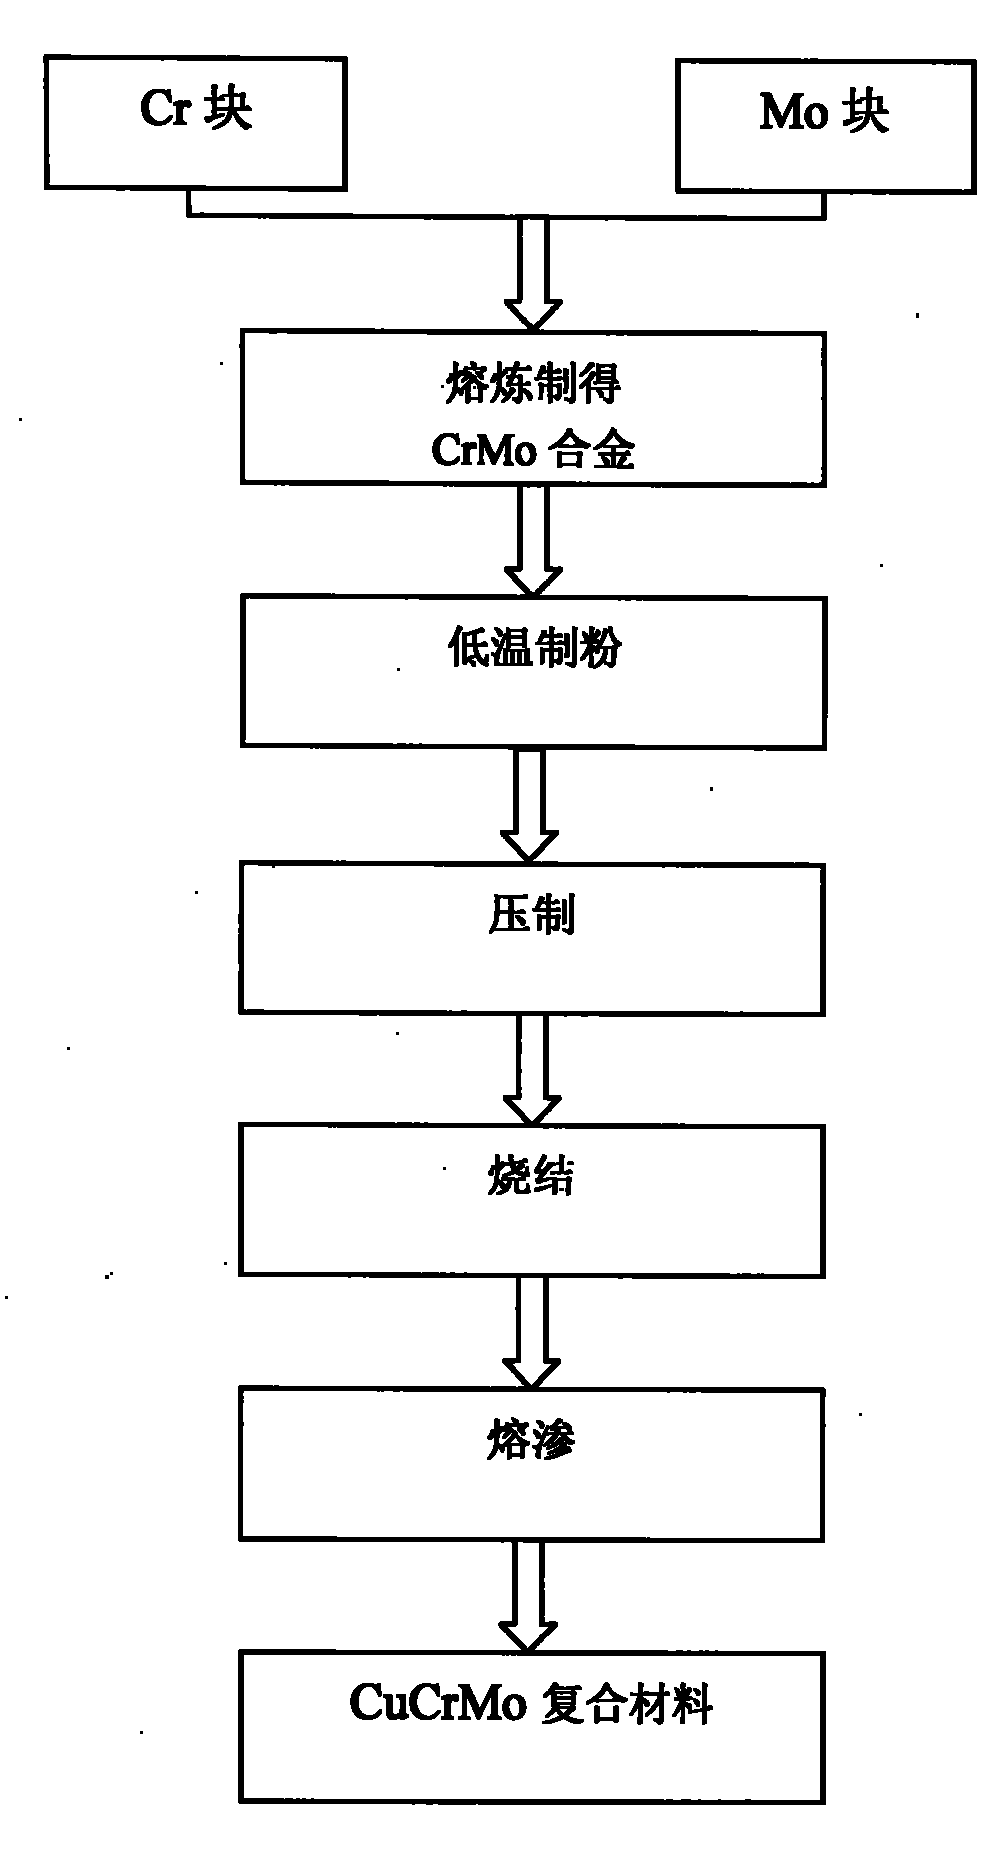 Method for preparing CuCrMo contact material by adopting CrMo alloy powder